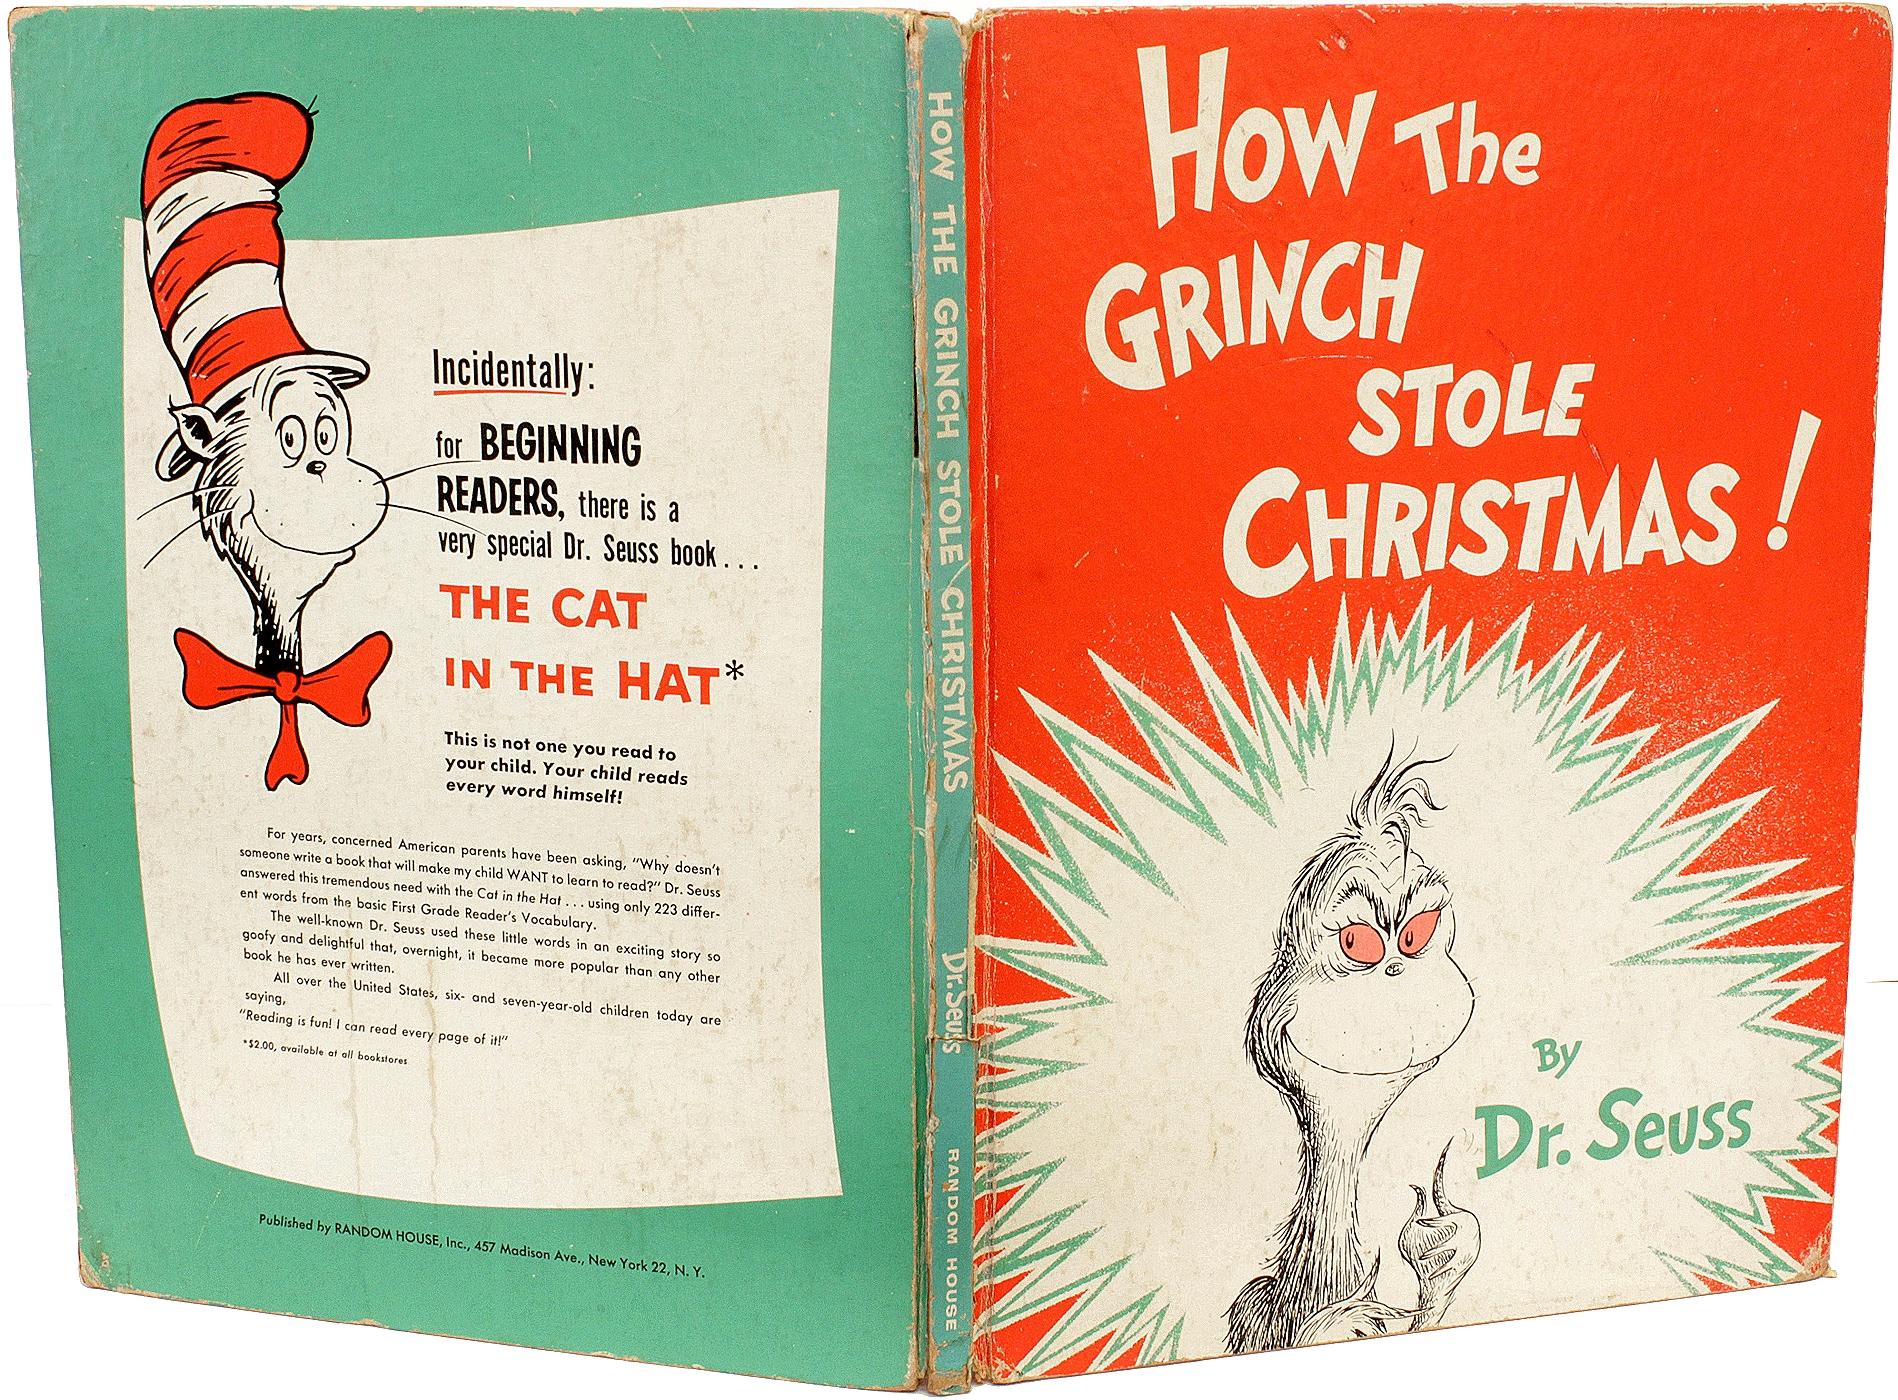 American GEISEL (Seuss) - How The Grinch Stole Christmas - FIRST EDITION INSCRIBED - 1957